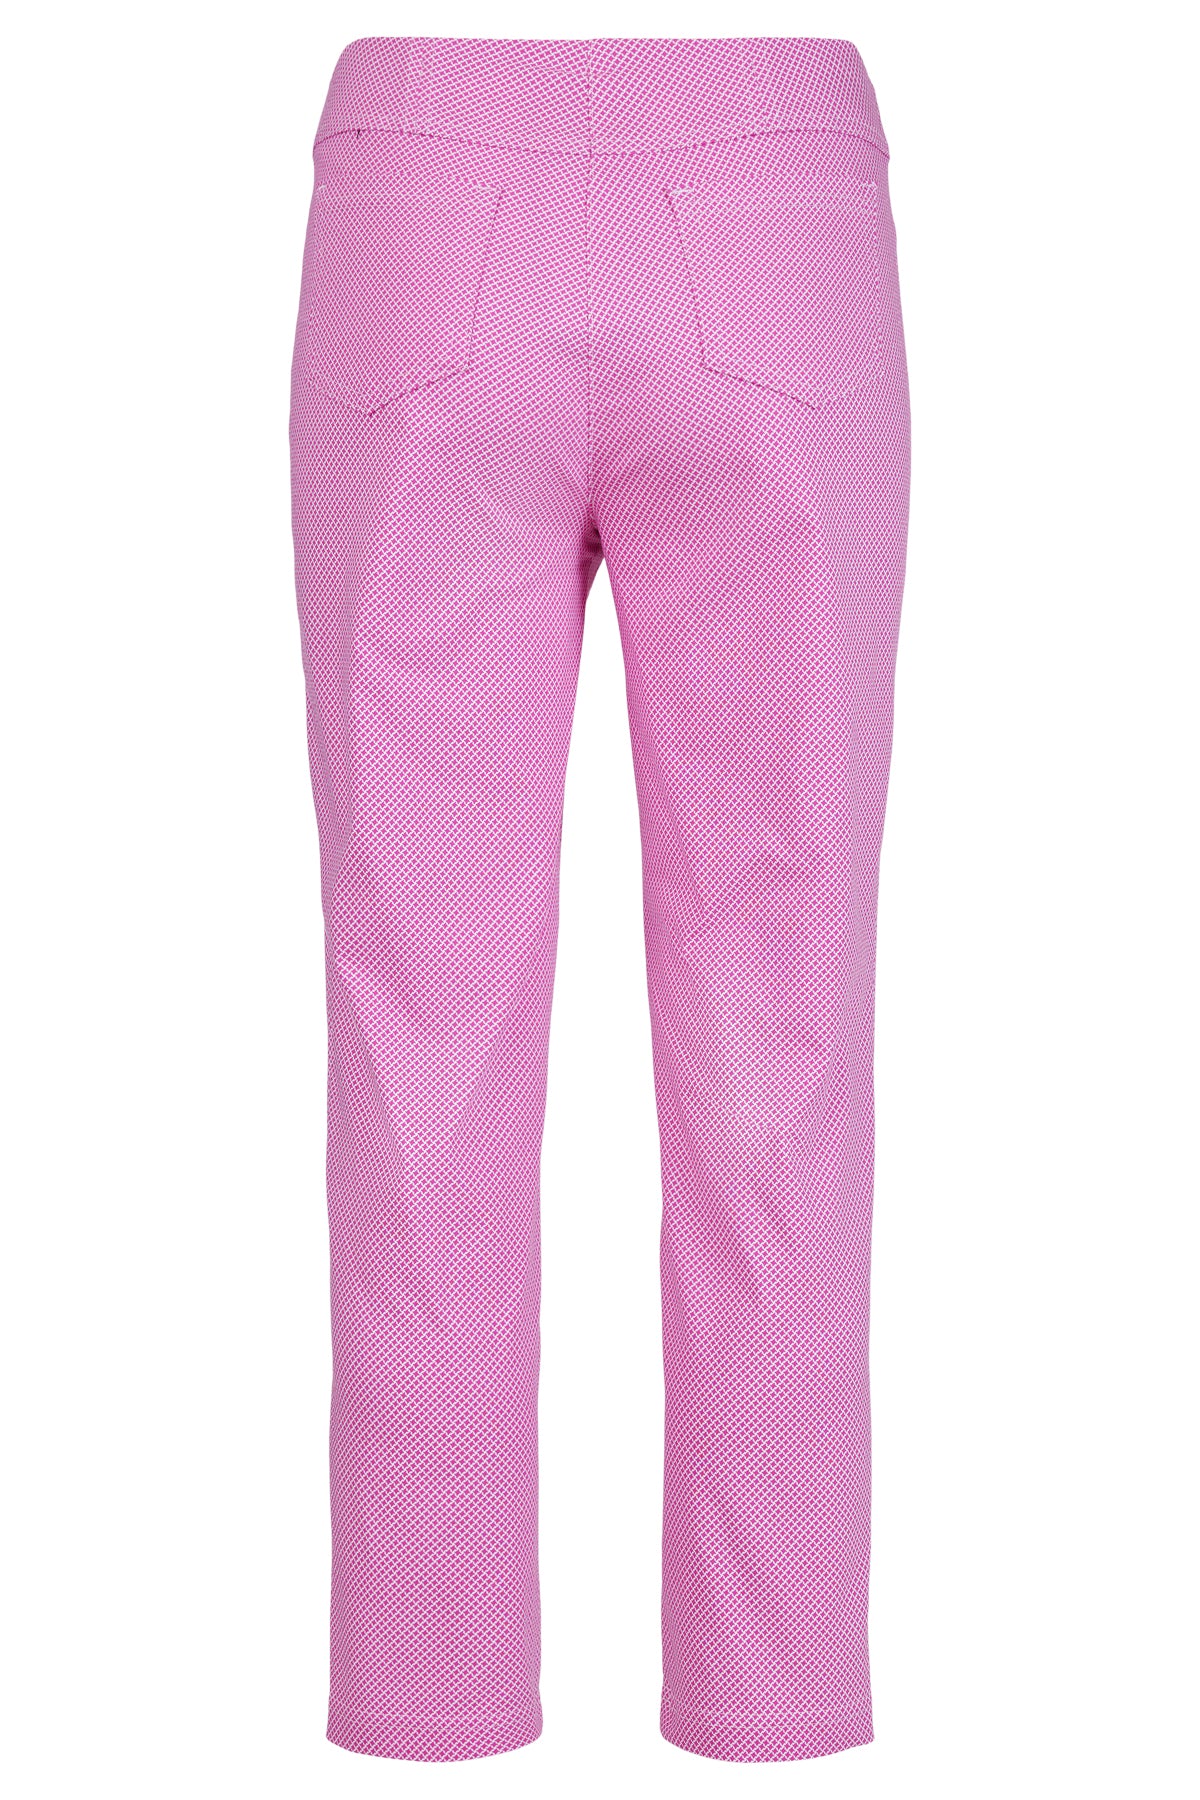 Bella Trousers in Pink